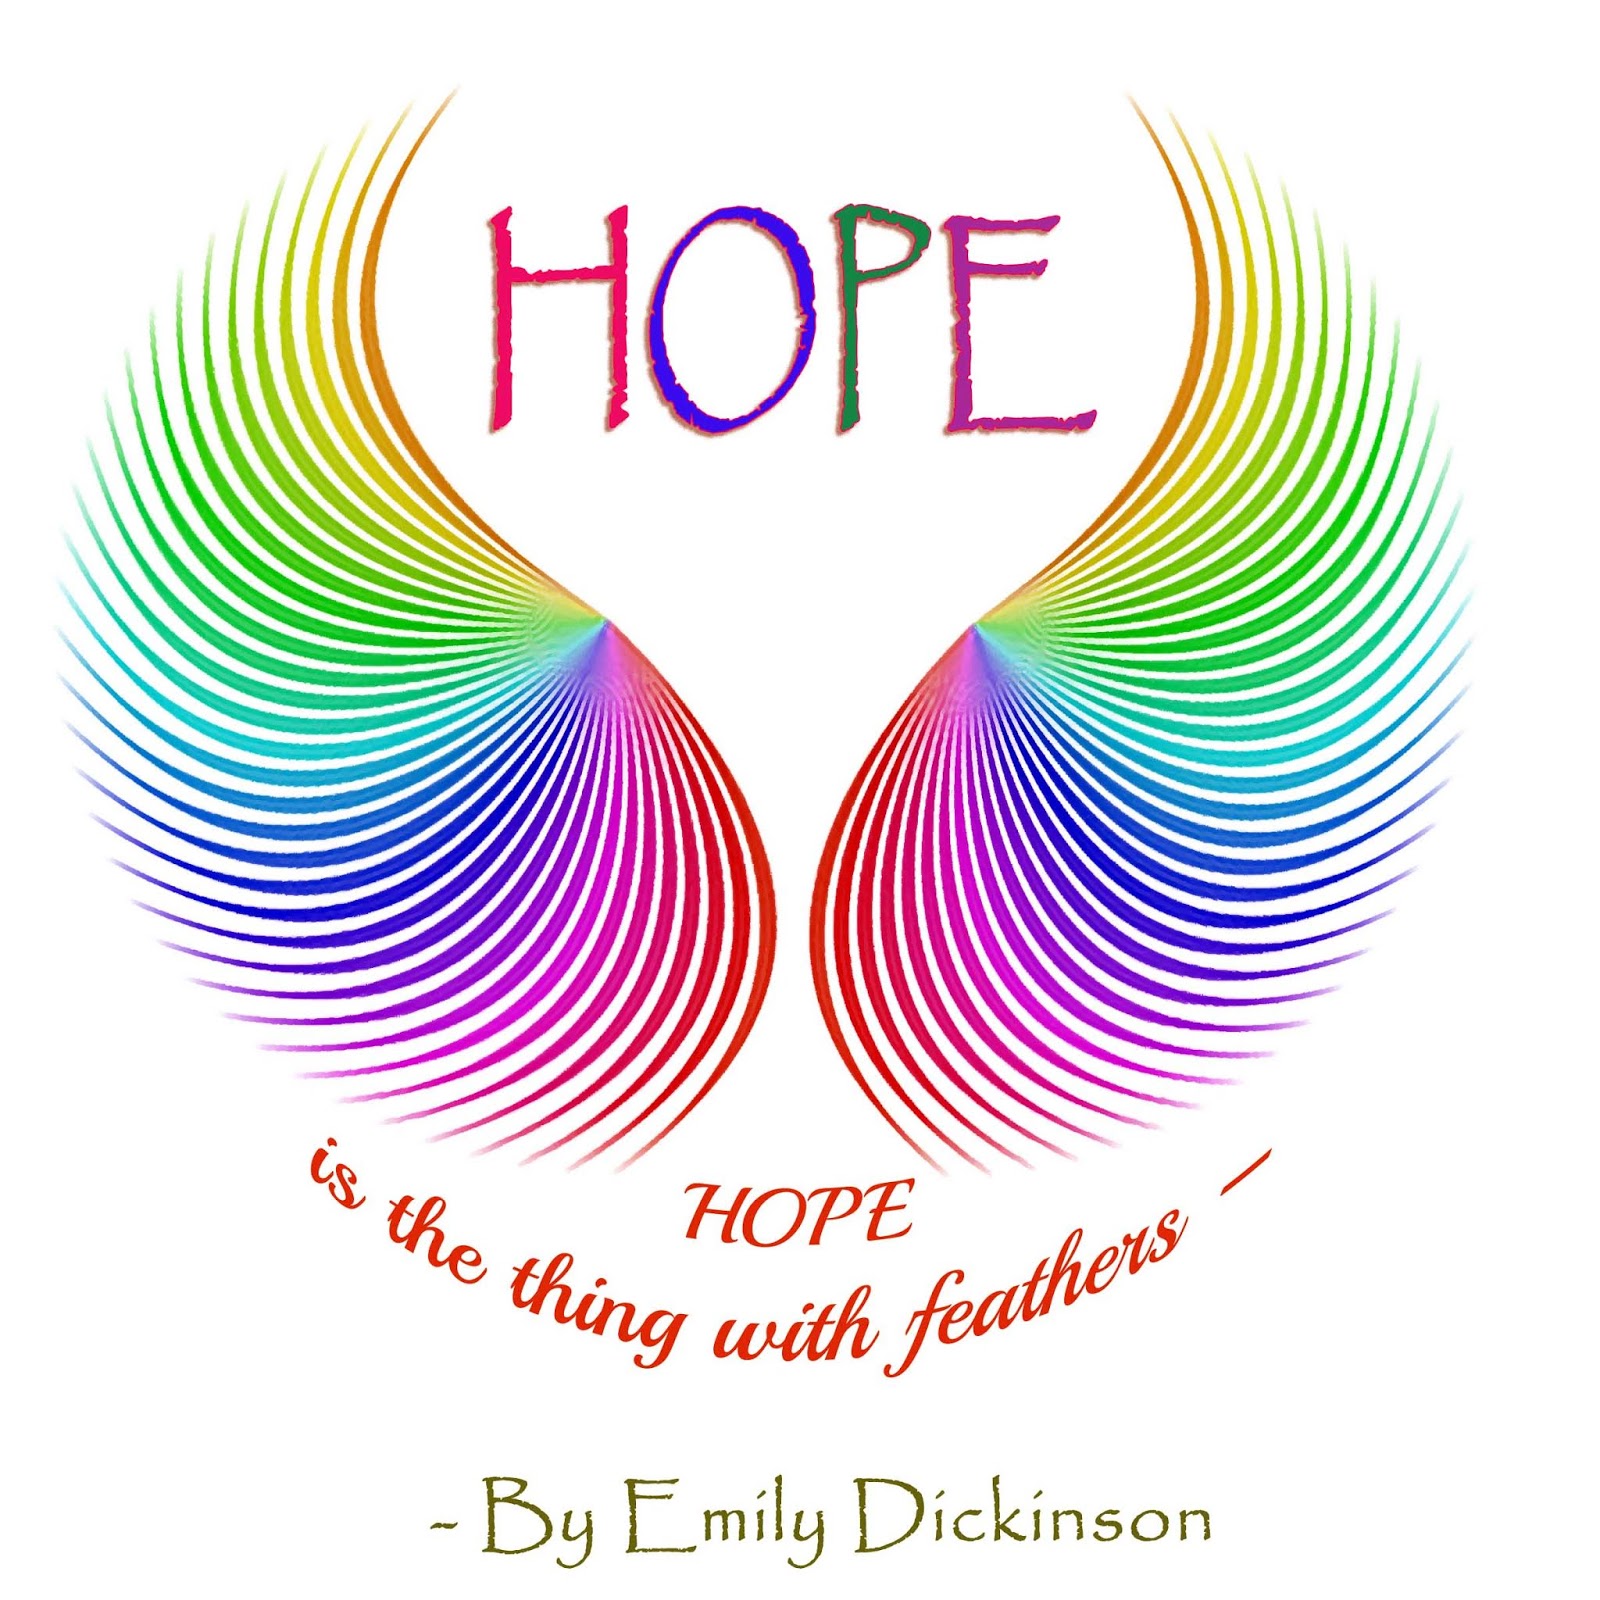 Emily Dickinson hope is the thing with Feathers. Hope is the thing with Feathers by Emily Dickinson. Hope is the thing with Feathers by Emily Dickinson перевод. Hope show